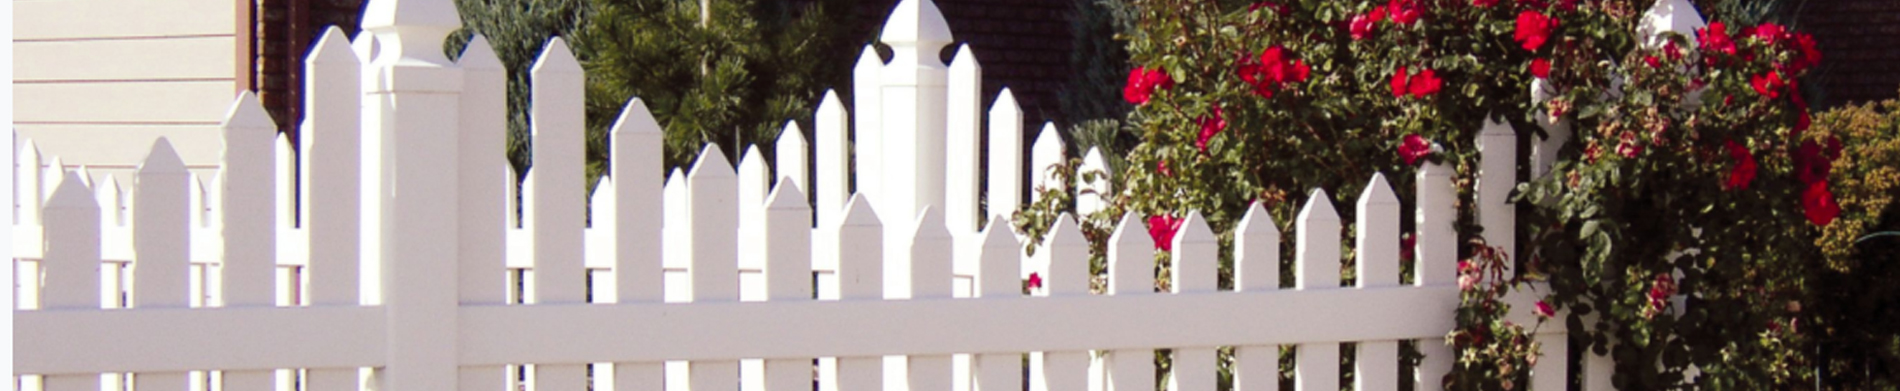 All you need to know about privacy fence panels – Install Duramax vinyl fences around your property